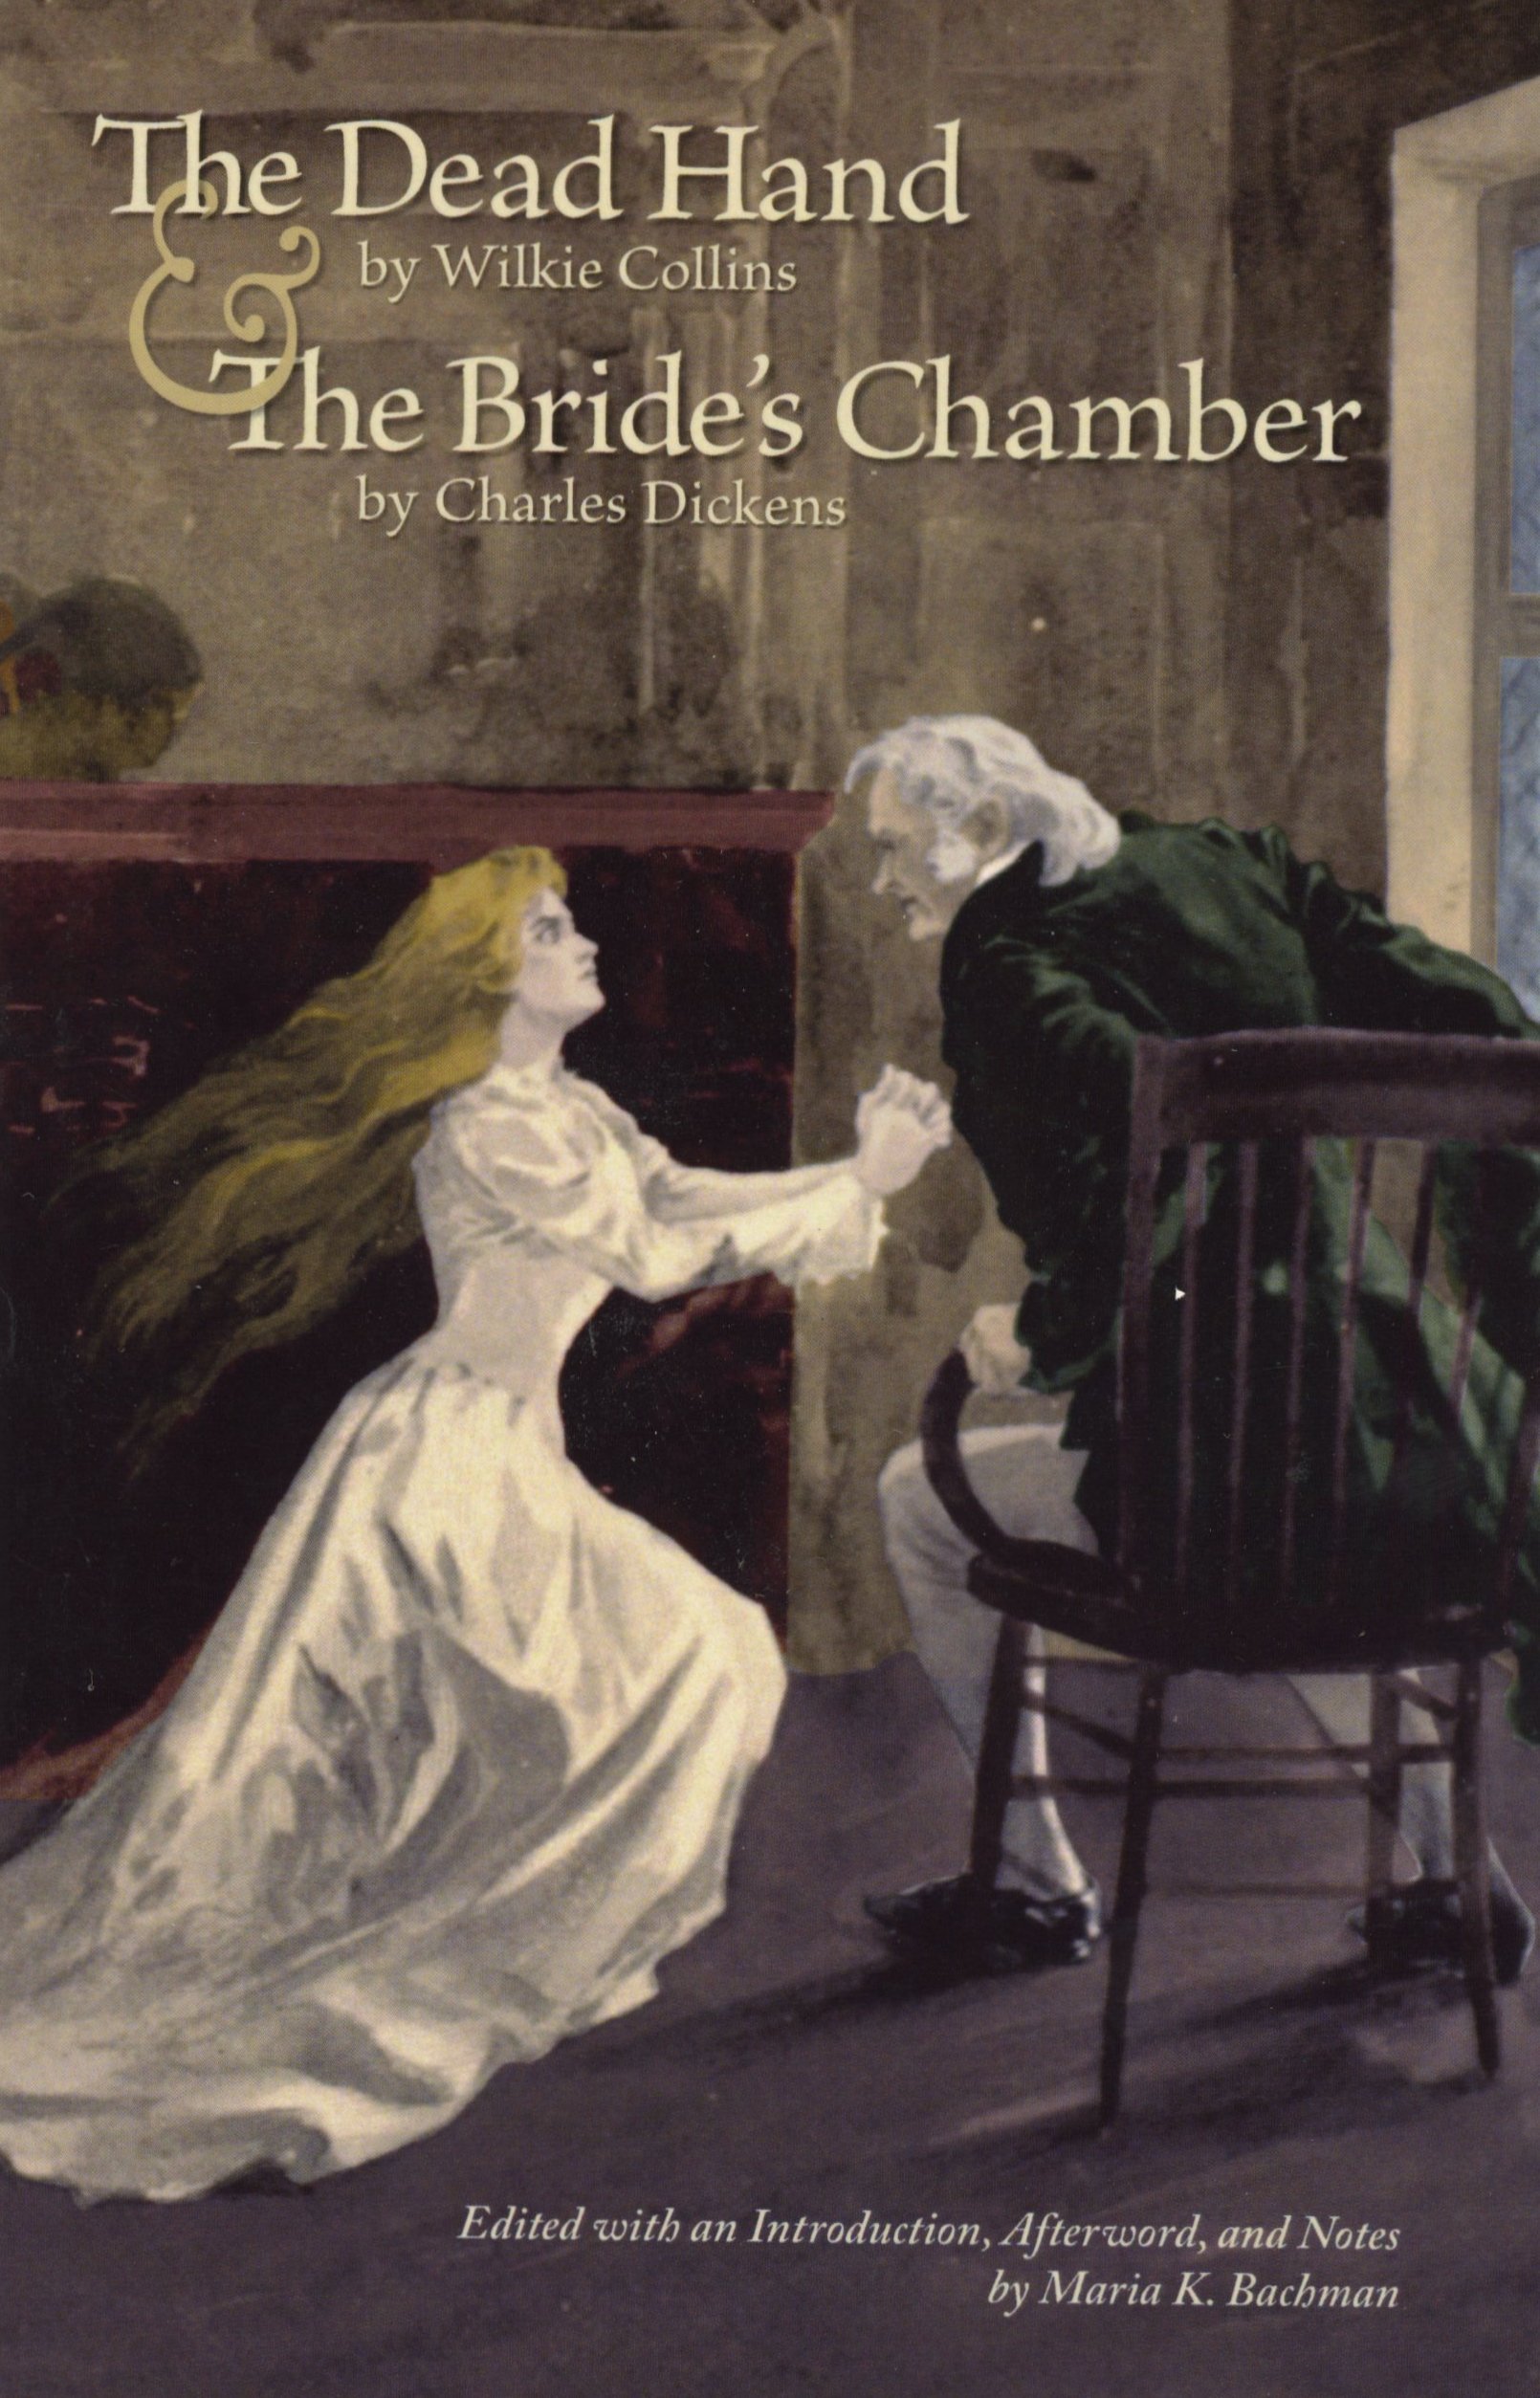 Image of the front cover of The Dead Hand and the Bride's Chamber.